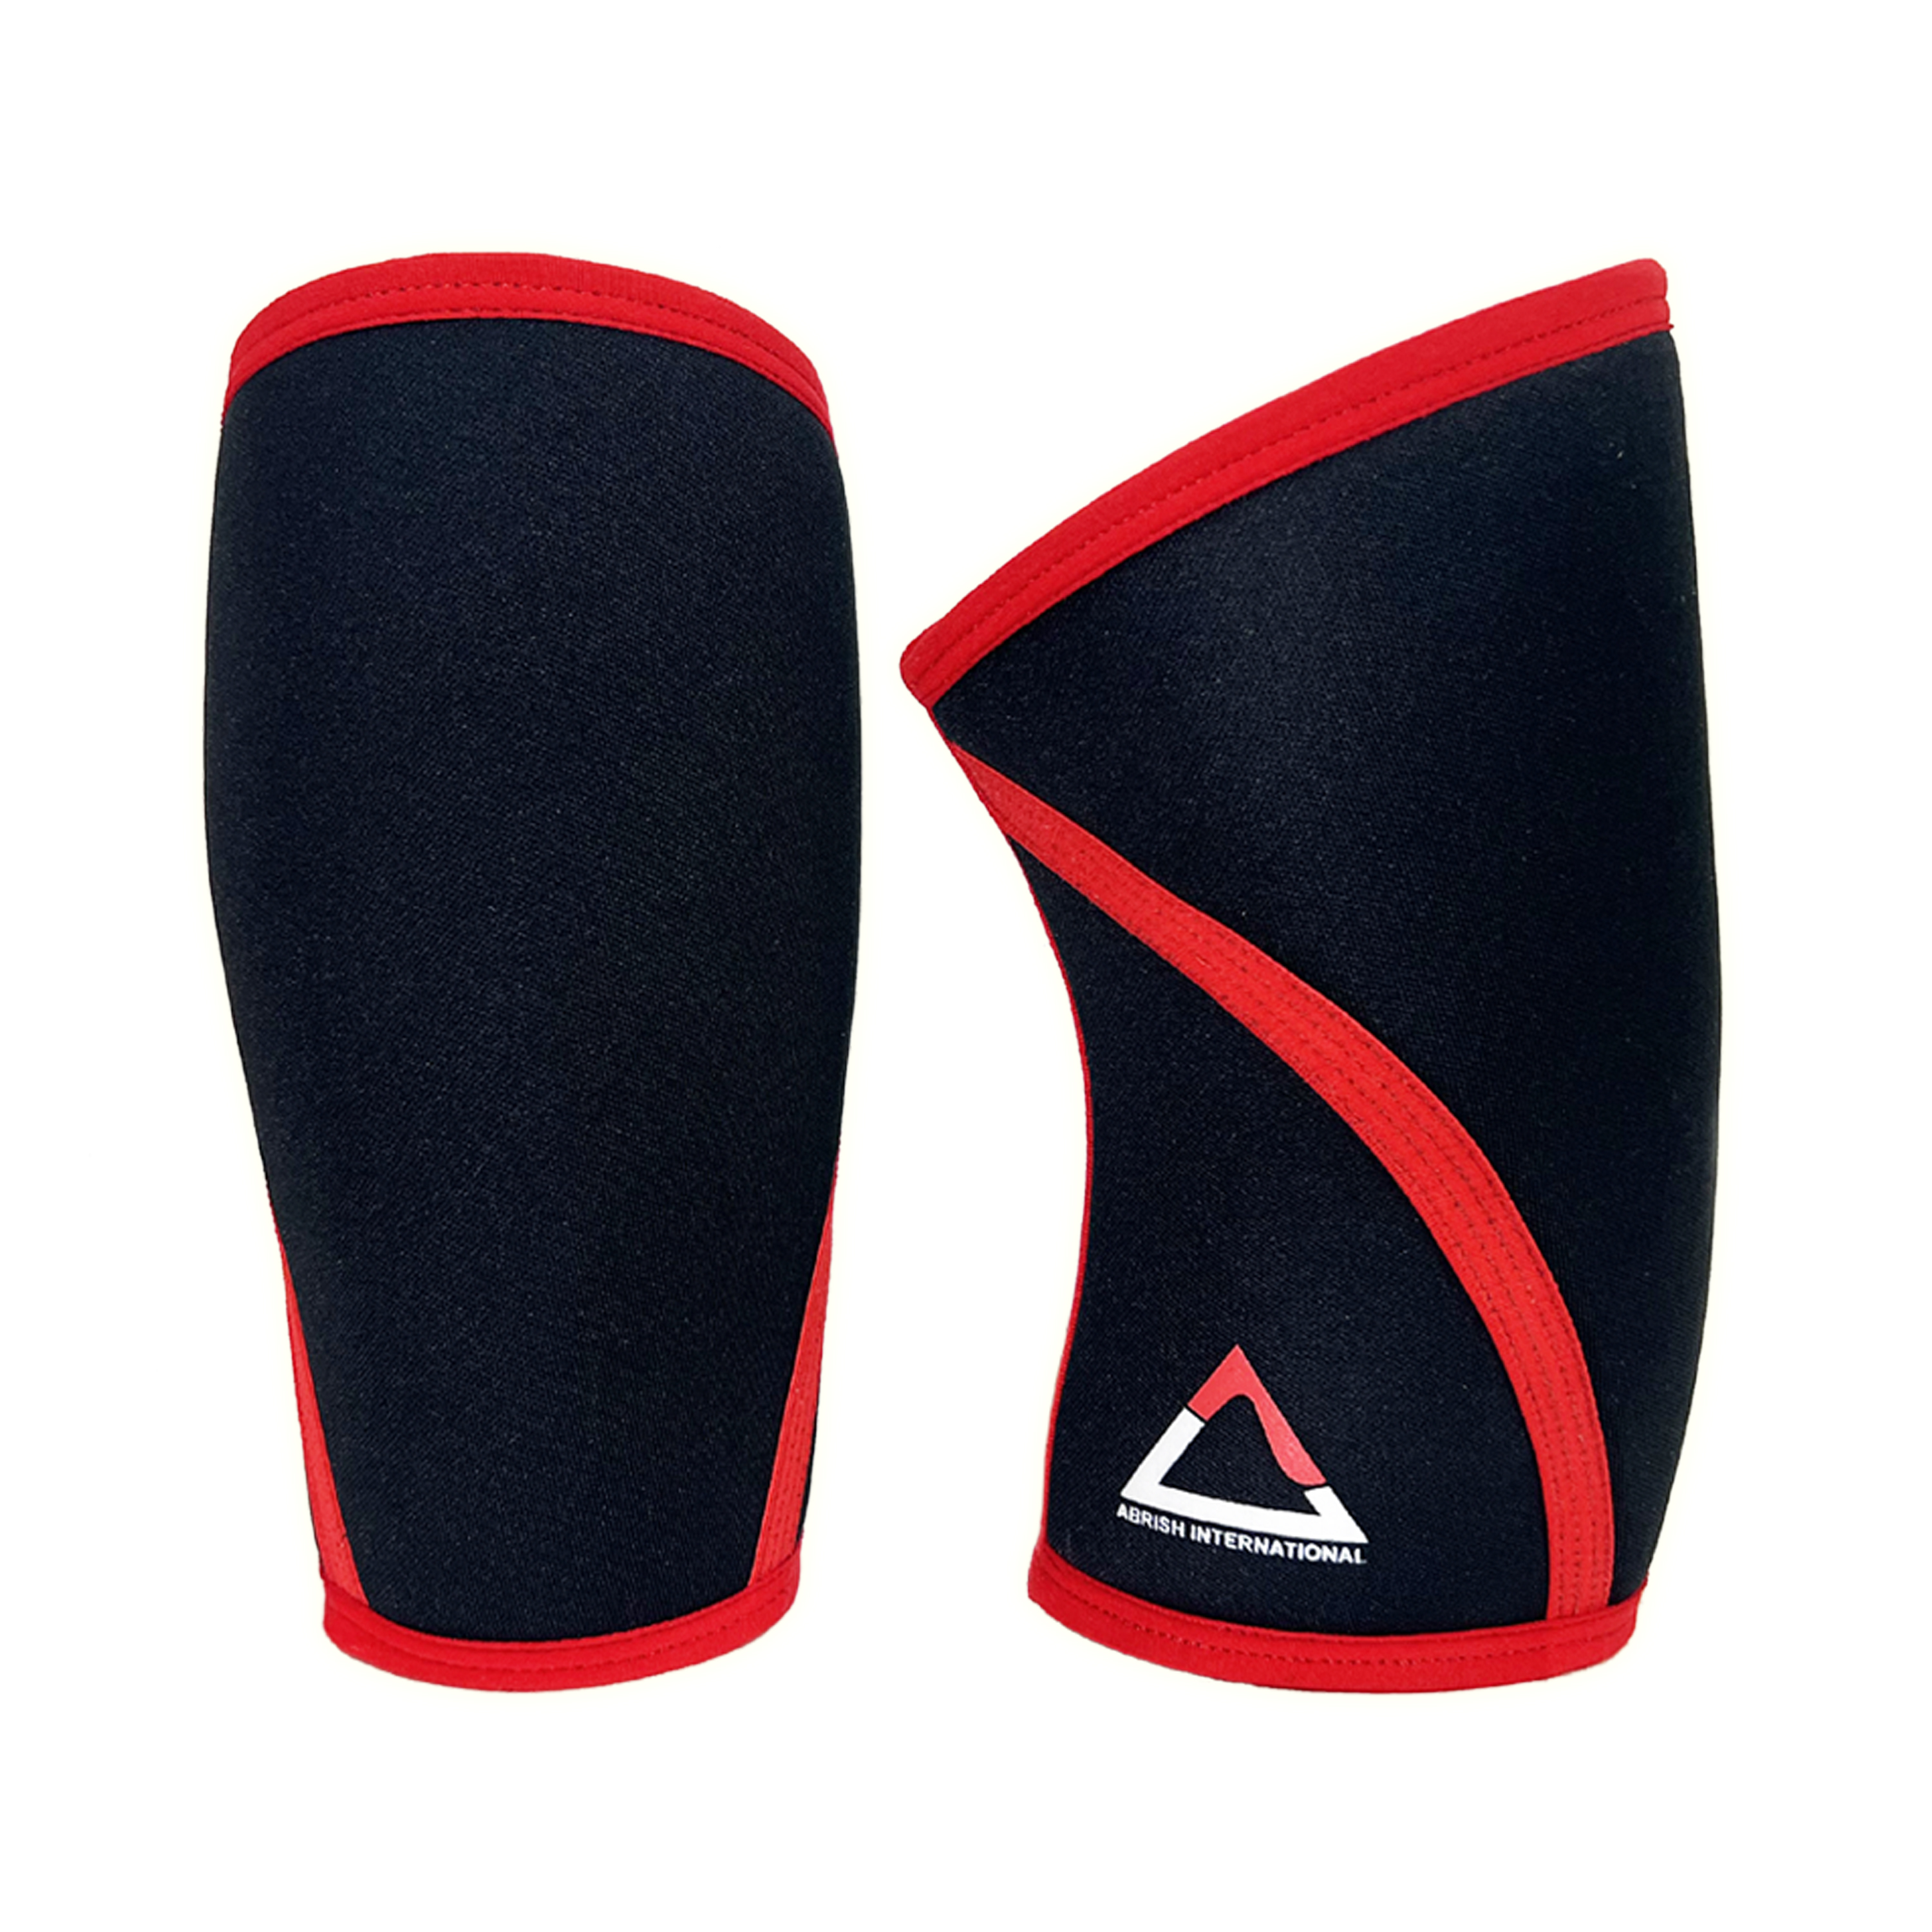 Black with Red lining Knee Support